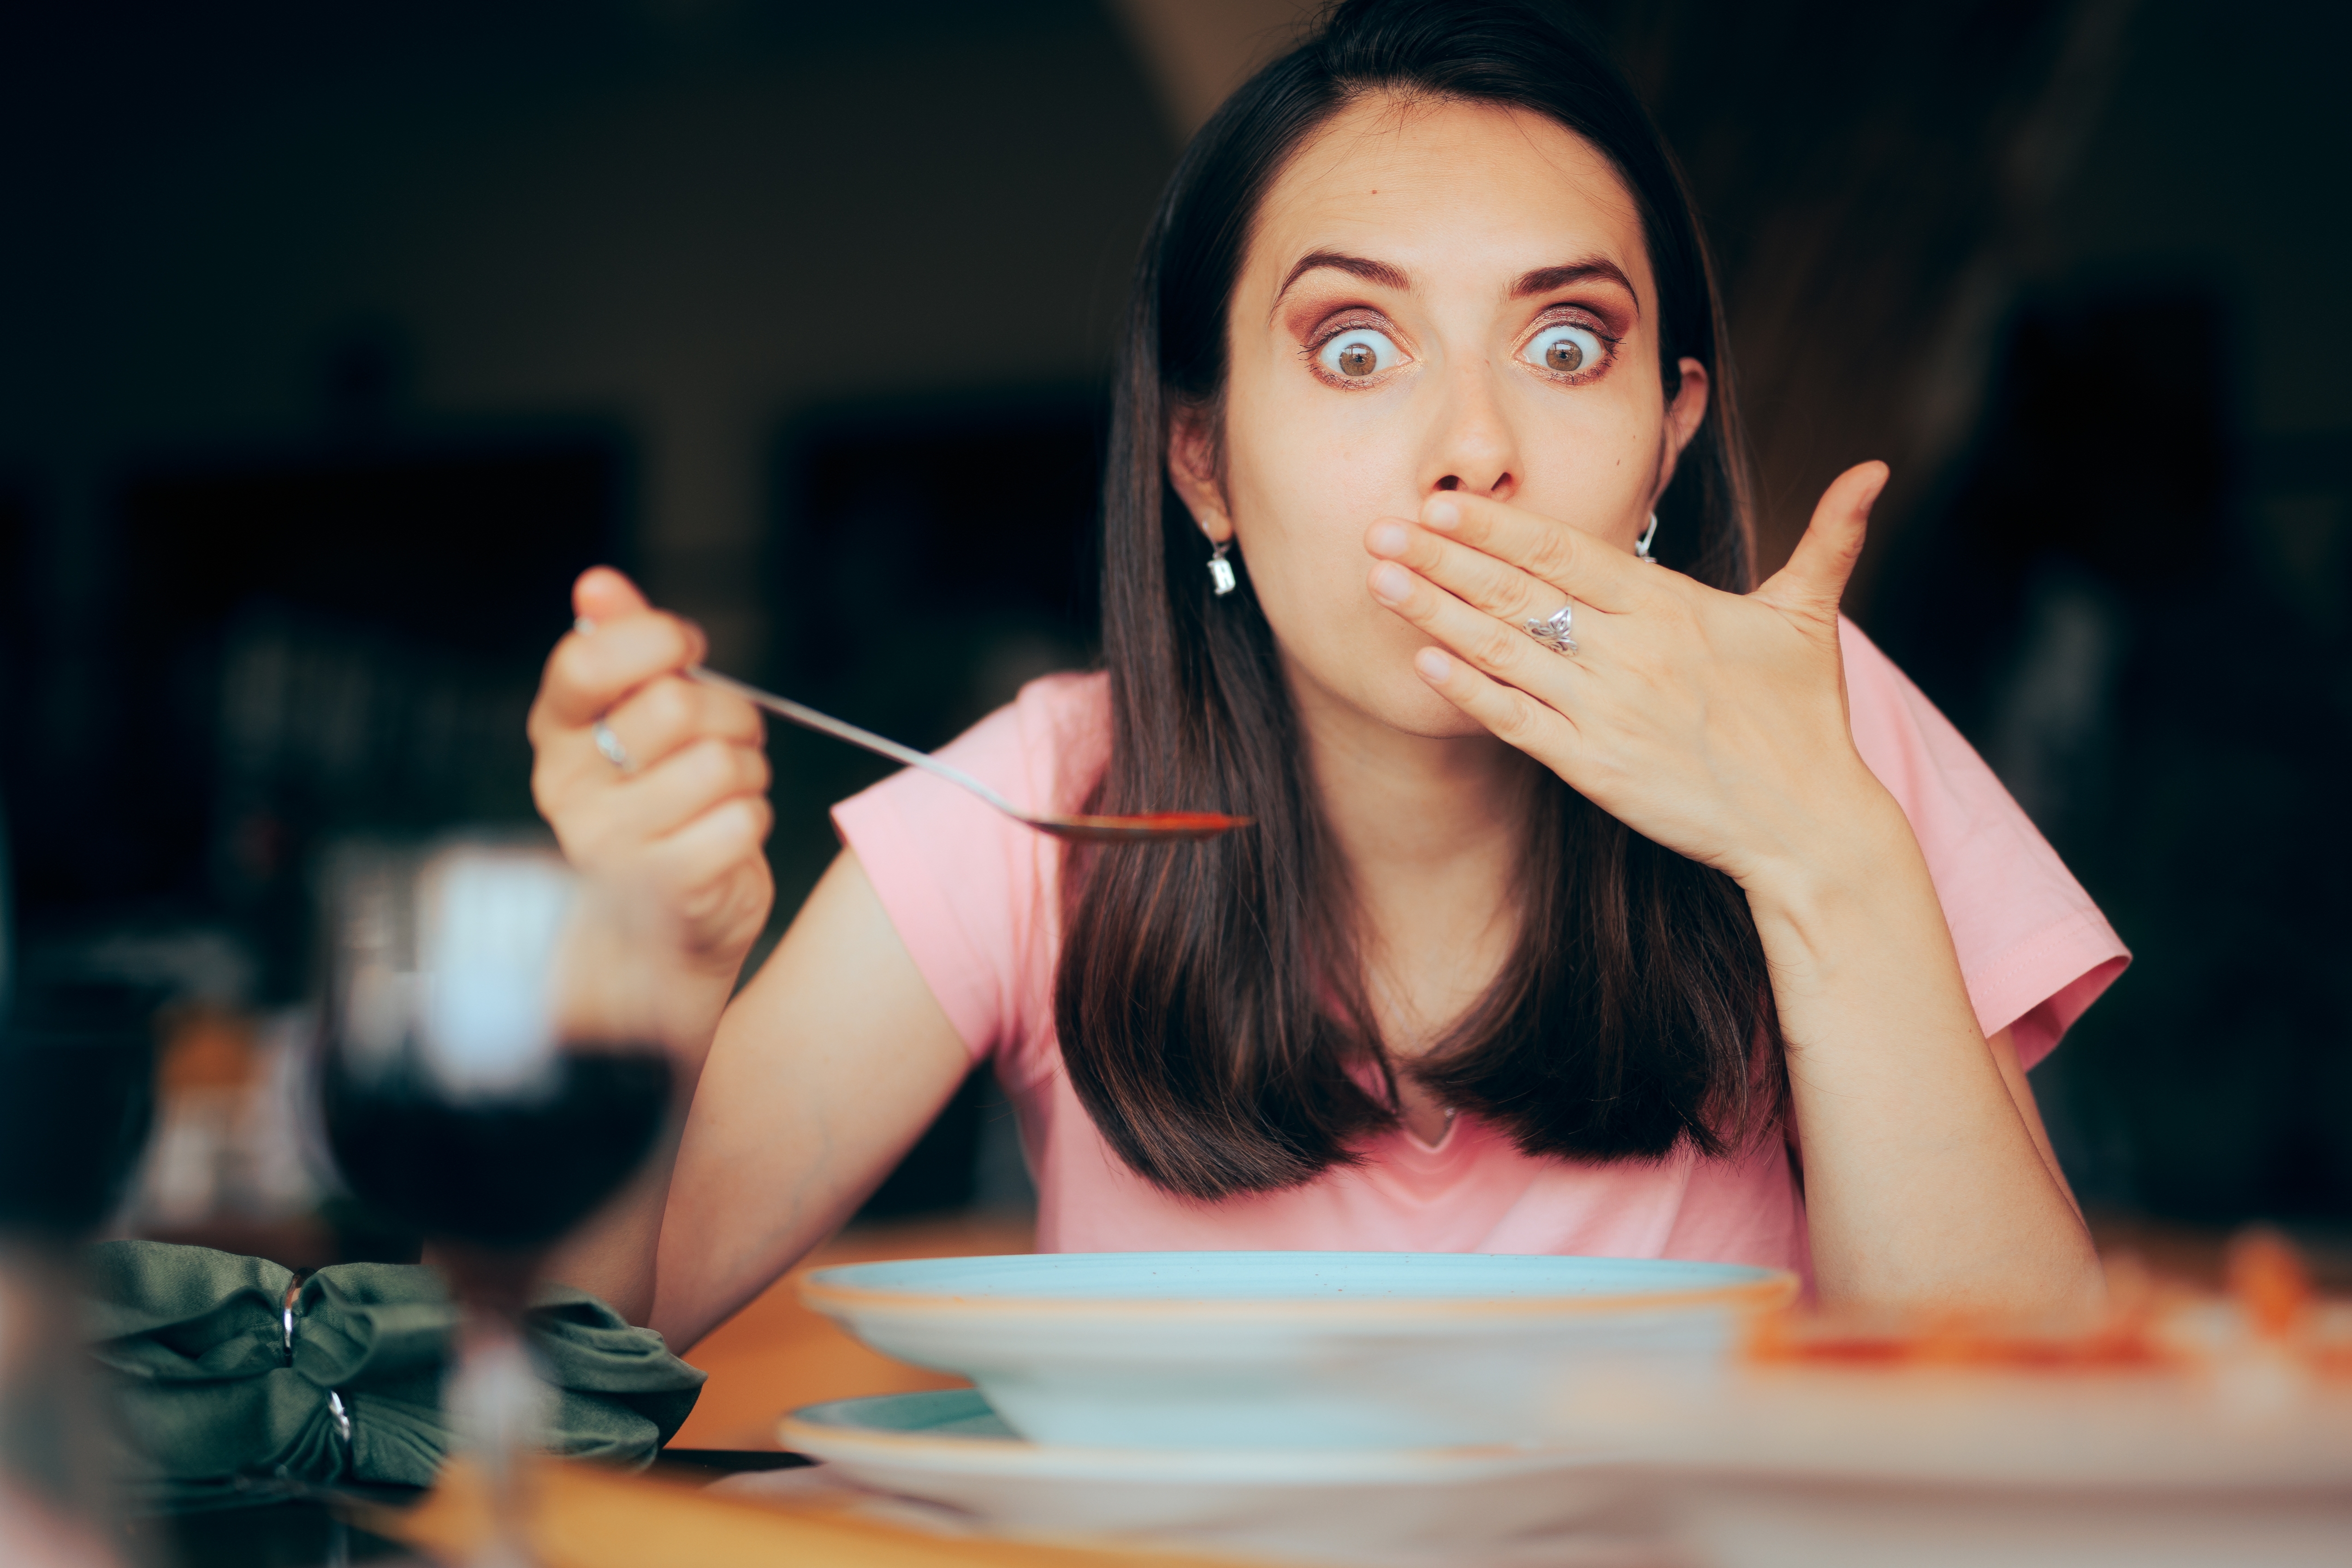 A woman covers her mouth after eating food | Source: Shutterstock